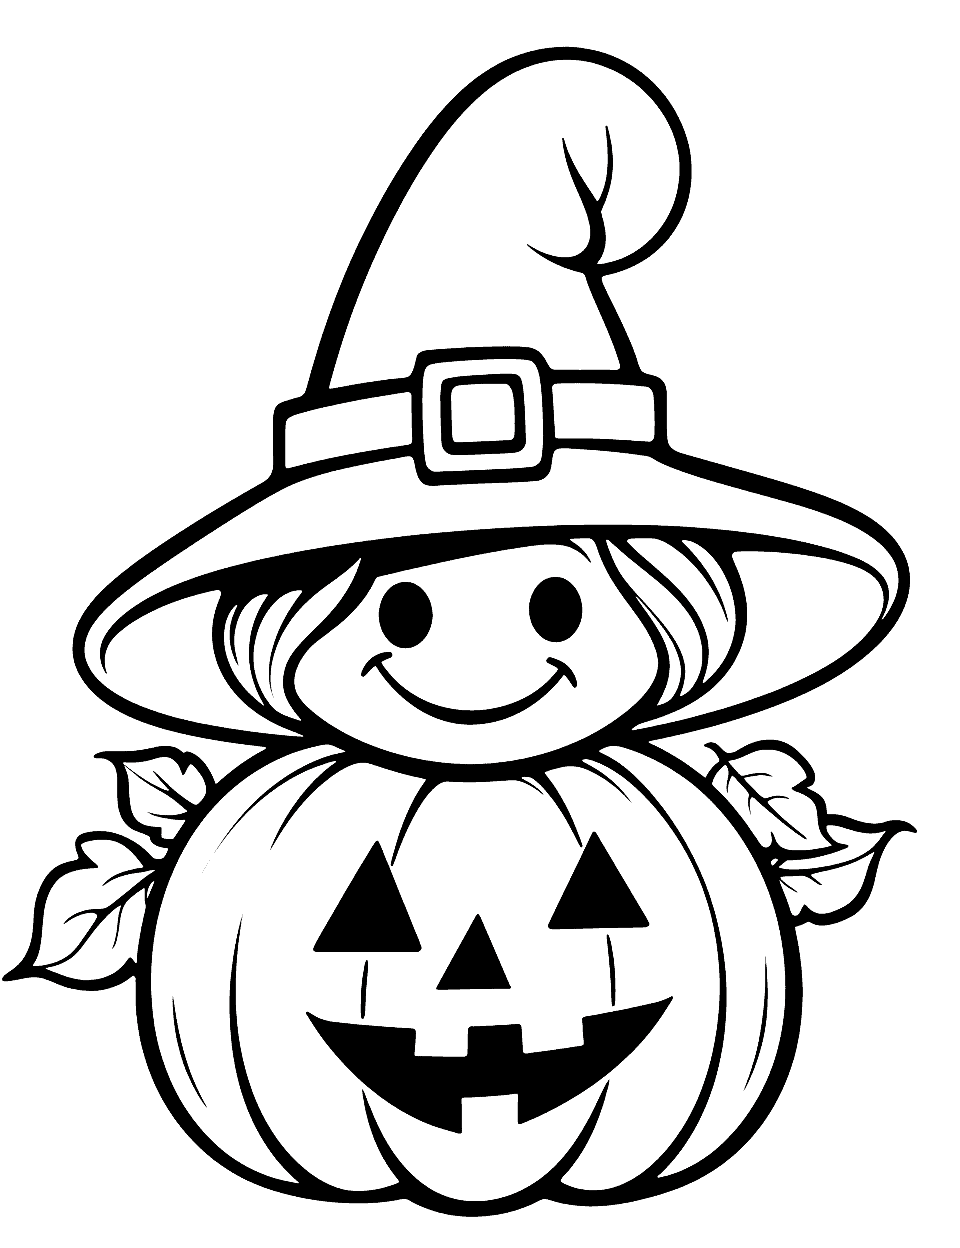 Cute Halloween Pumpkin Coloring Page - A charming pumpkin and a cute witch with rosy cheeks, wearing a witch’s hat. Great for younger kids to color with bright, cheerful colors.